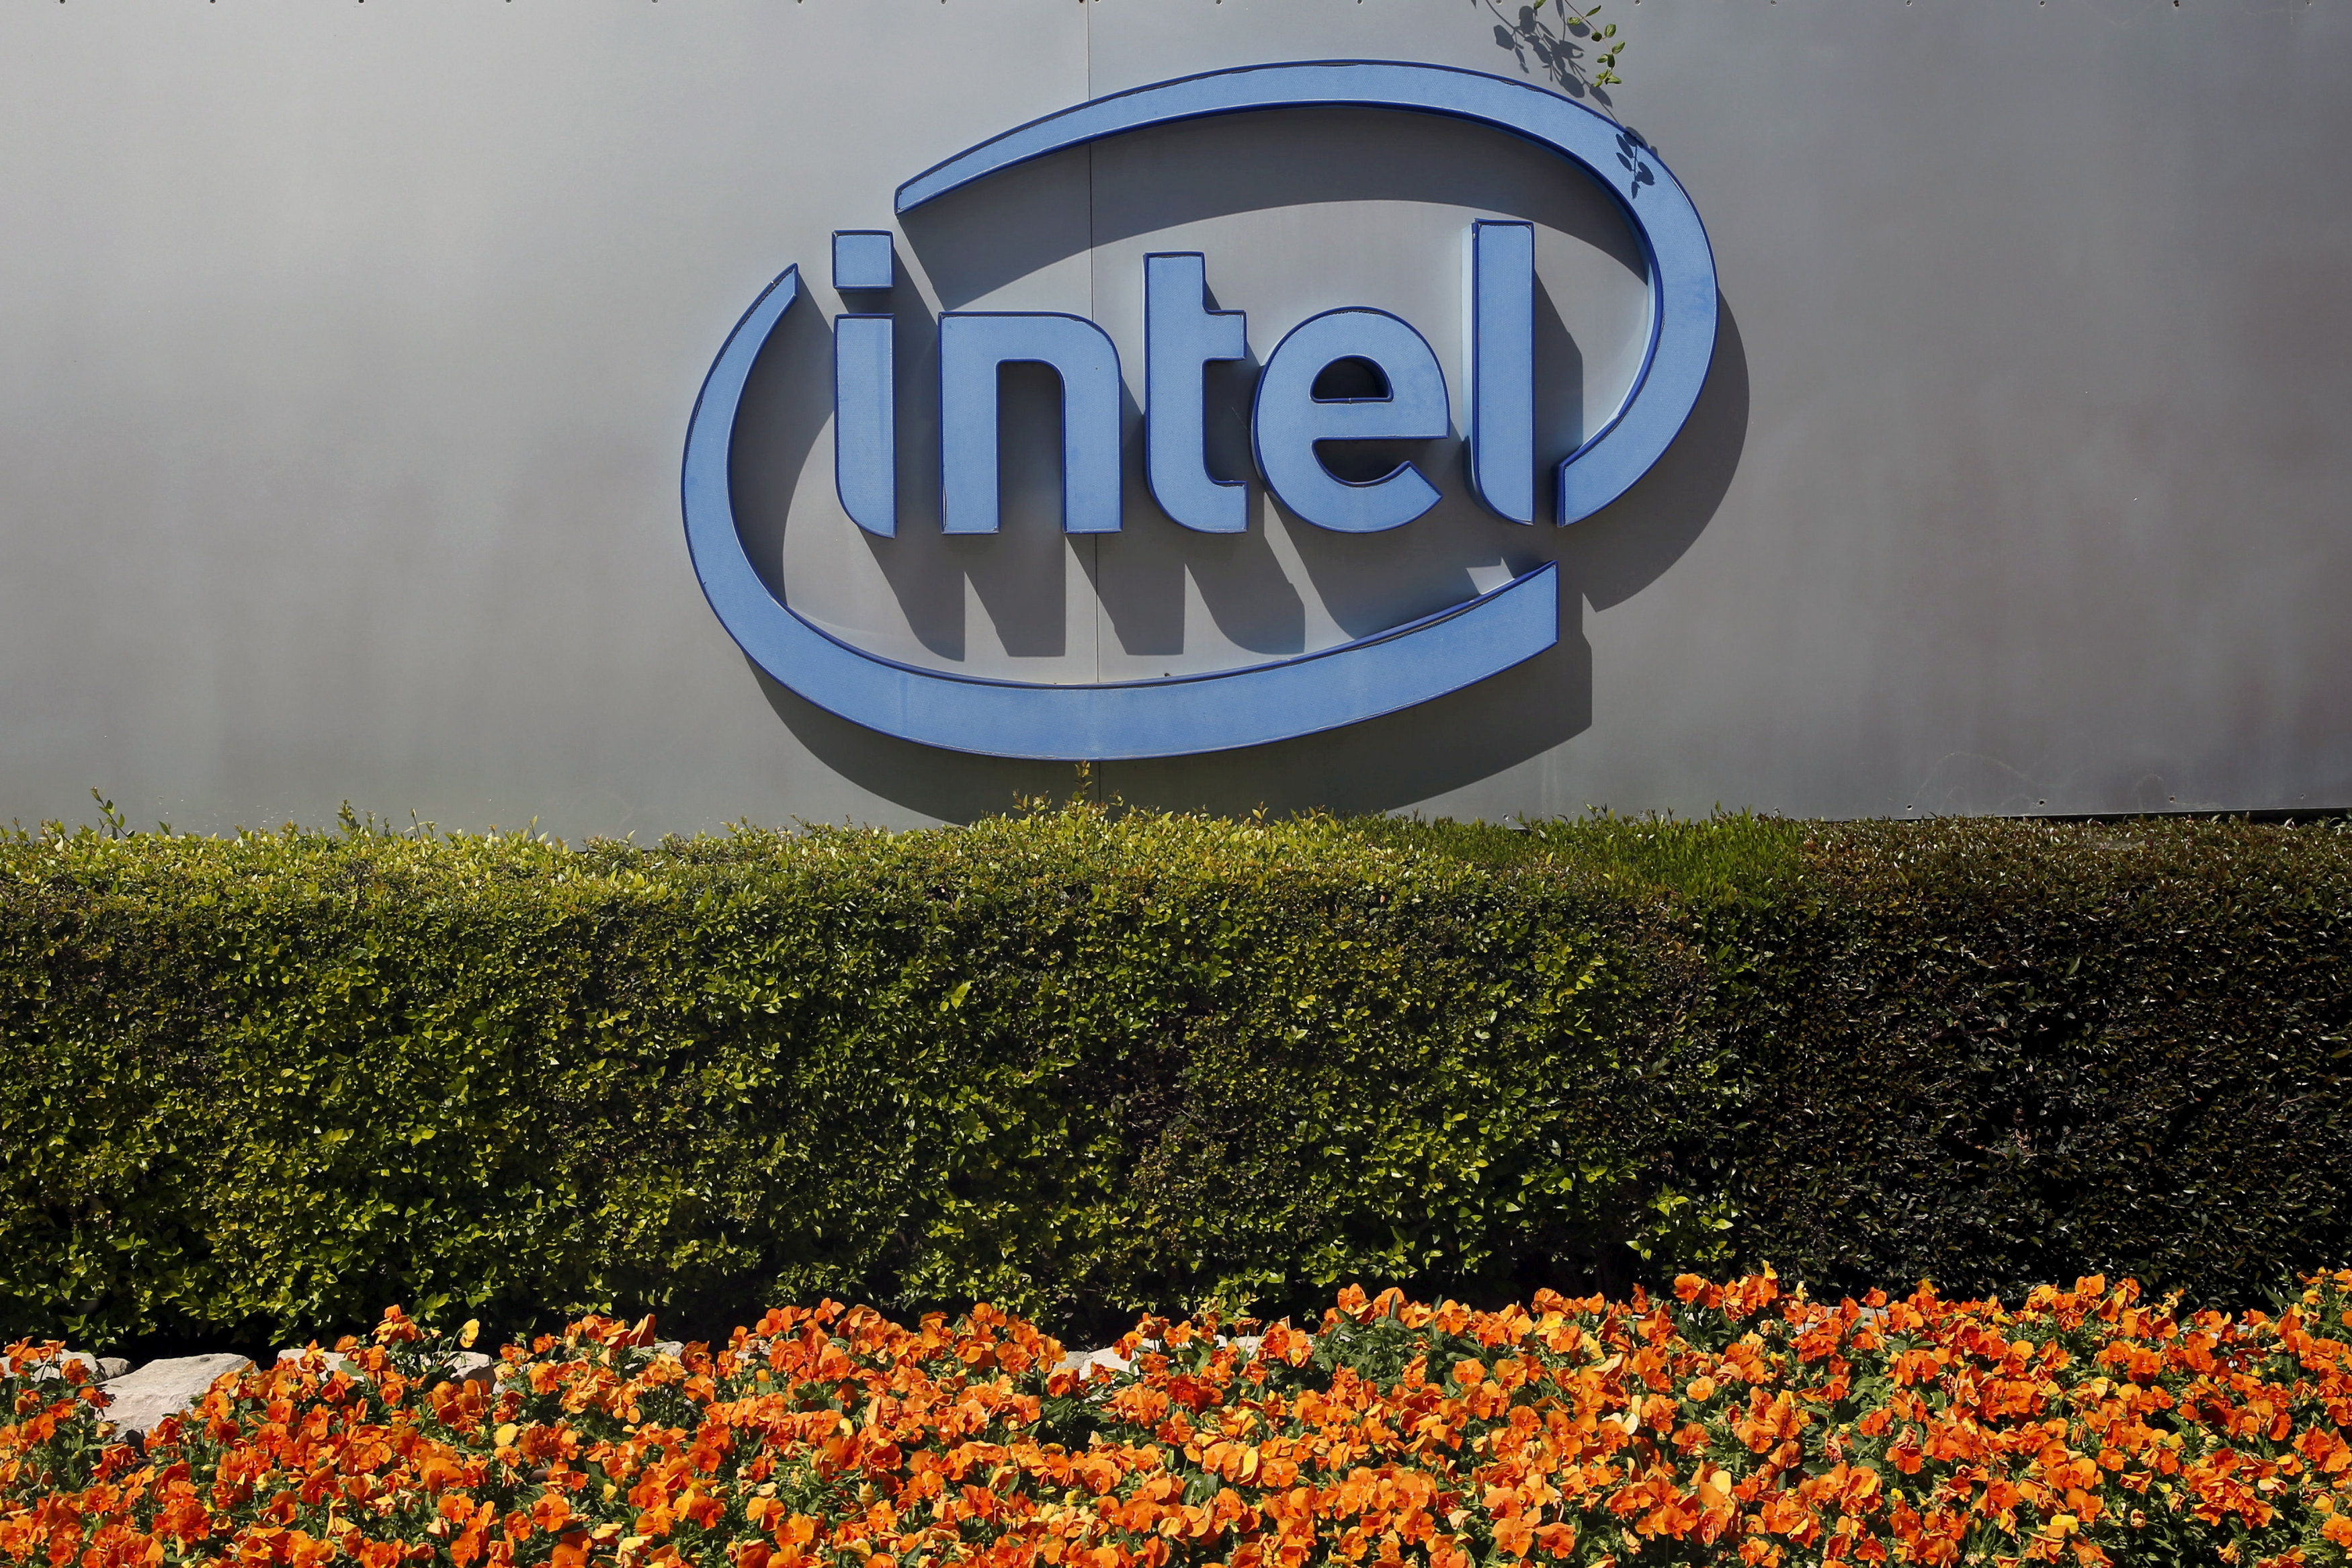 Intel's $15b purchase of Mobileye shakes up driverless car sector